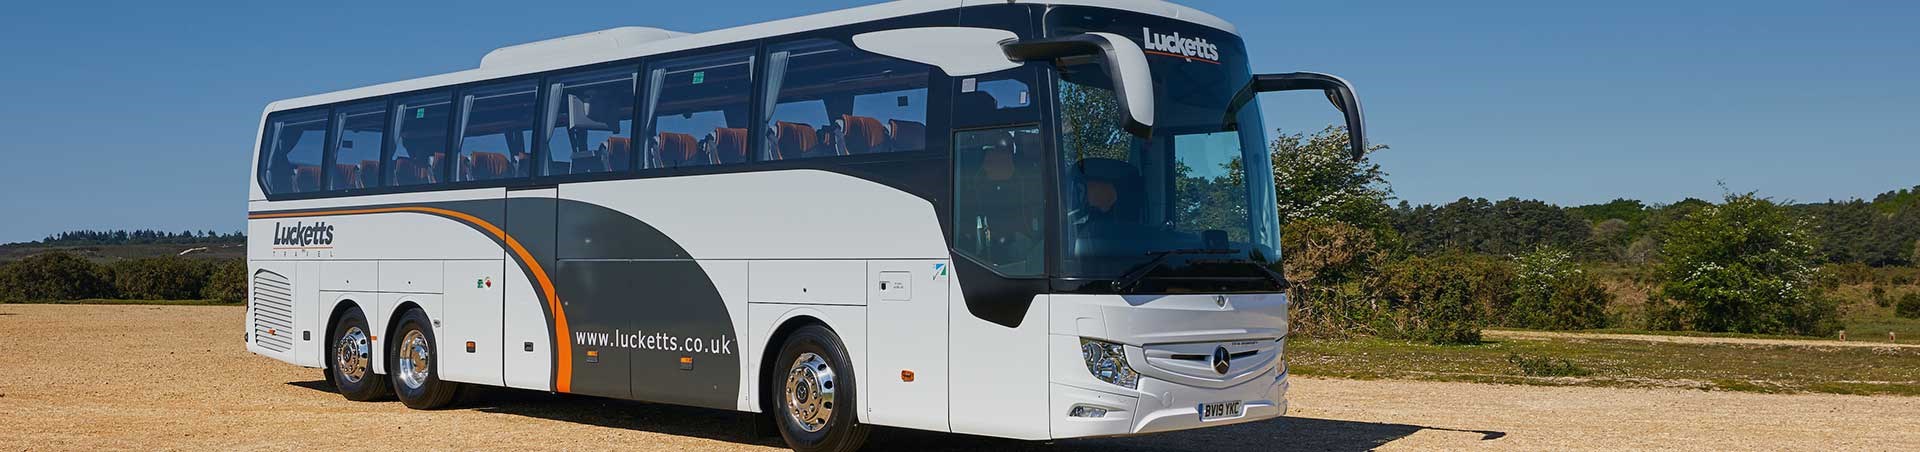 Lucketts Travel coach on private hire in Hampshire